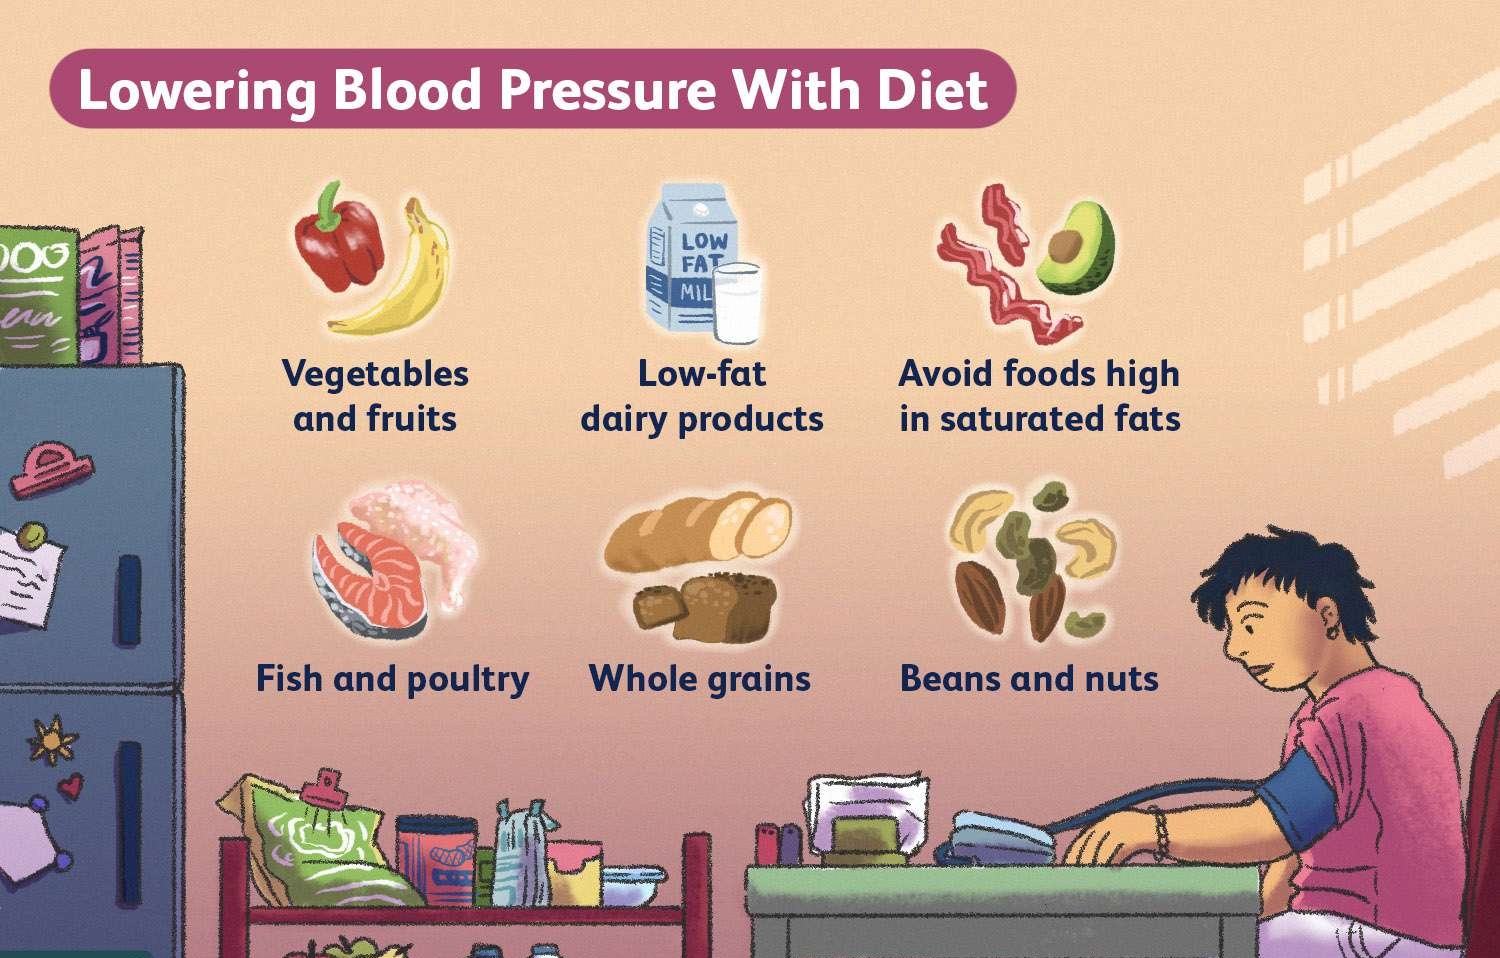 Lowering Blood Pressure with Diet poster